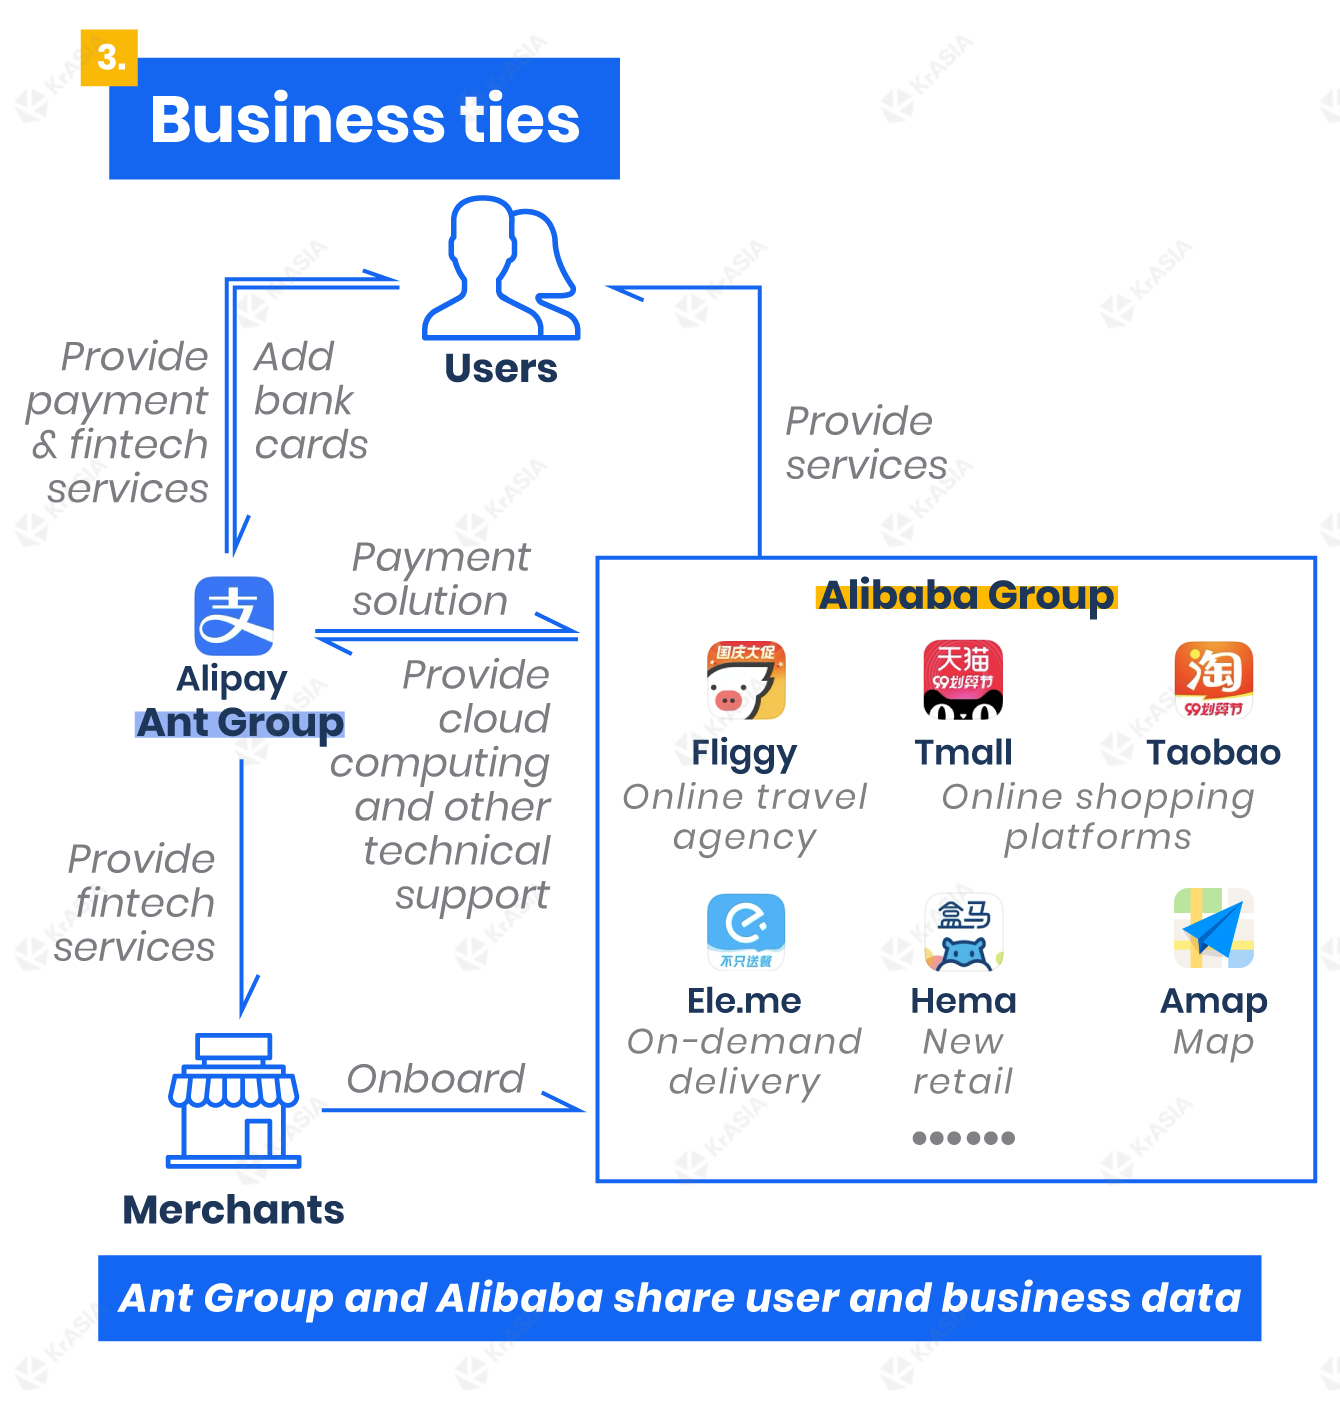 Ant Group's business ties with Alibaba